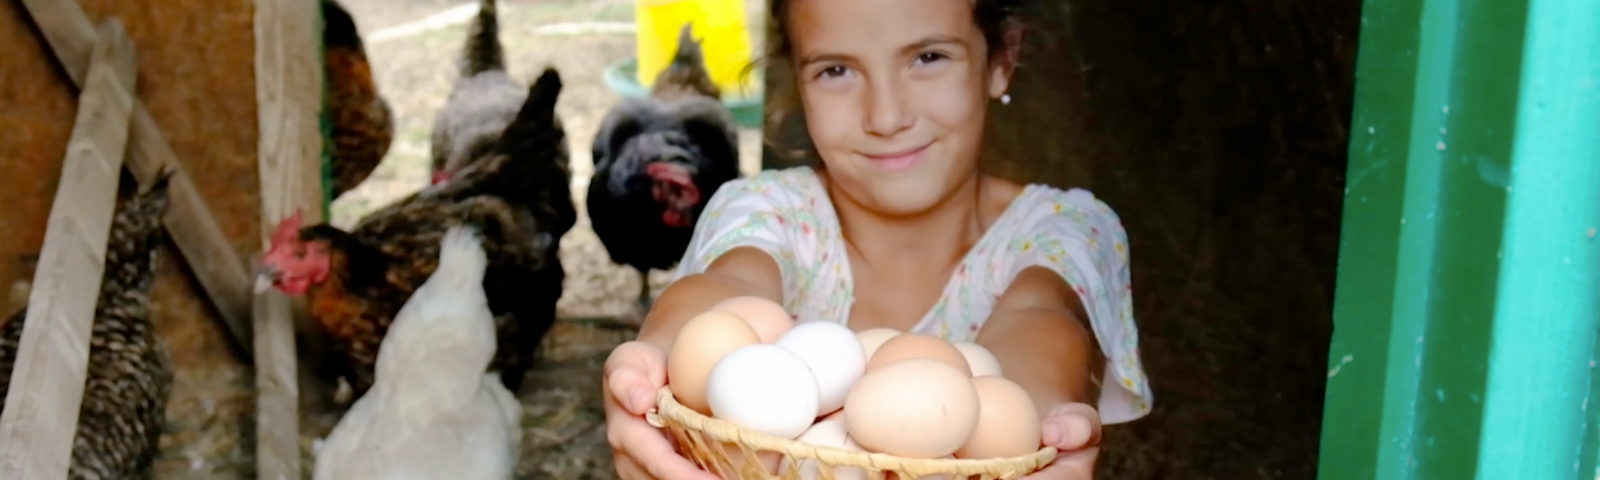 Eggs All Winter:  How to Use Supplemental Lighting to Sustain Egg Production